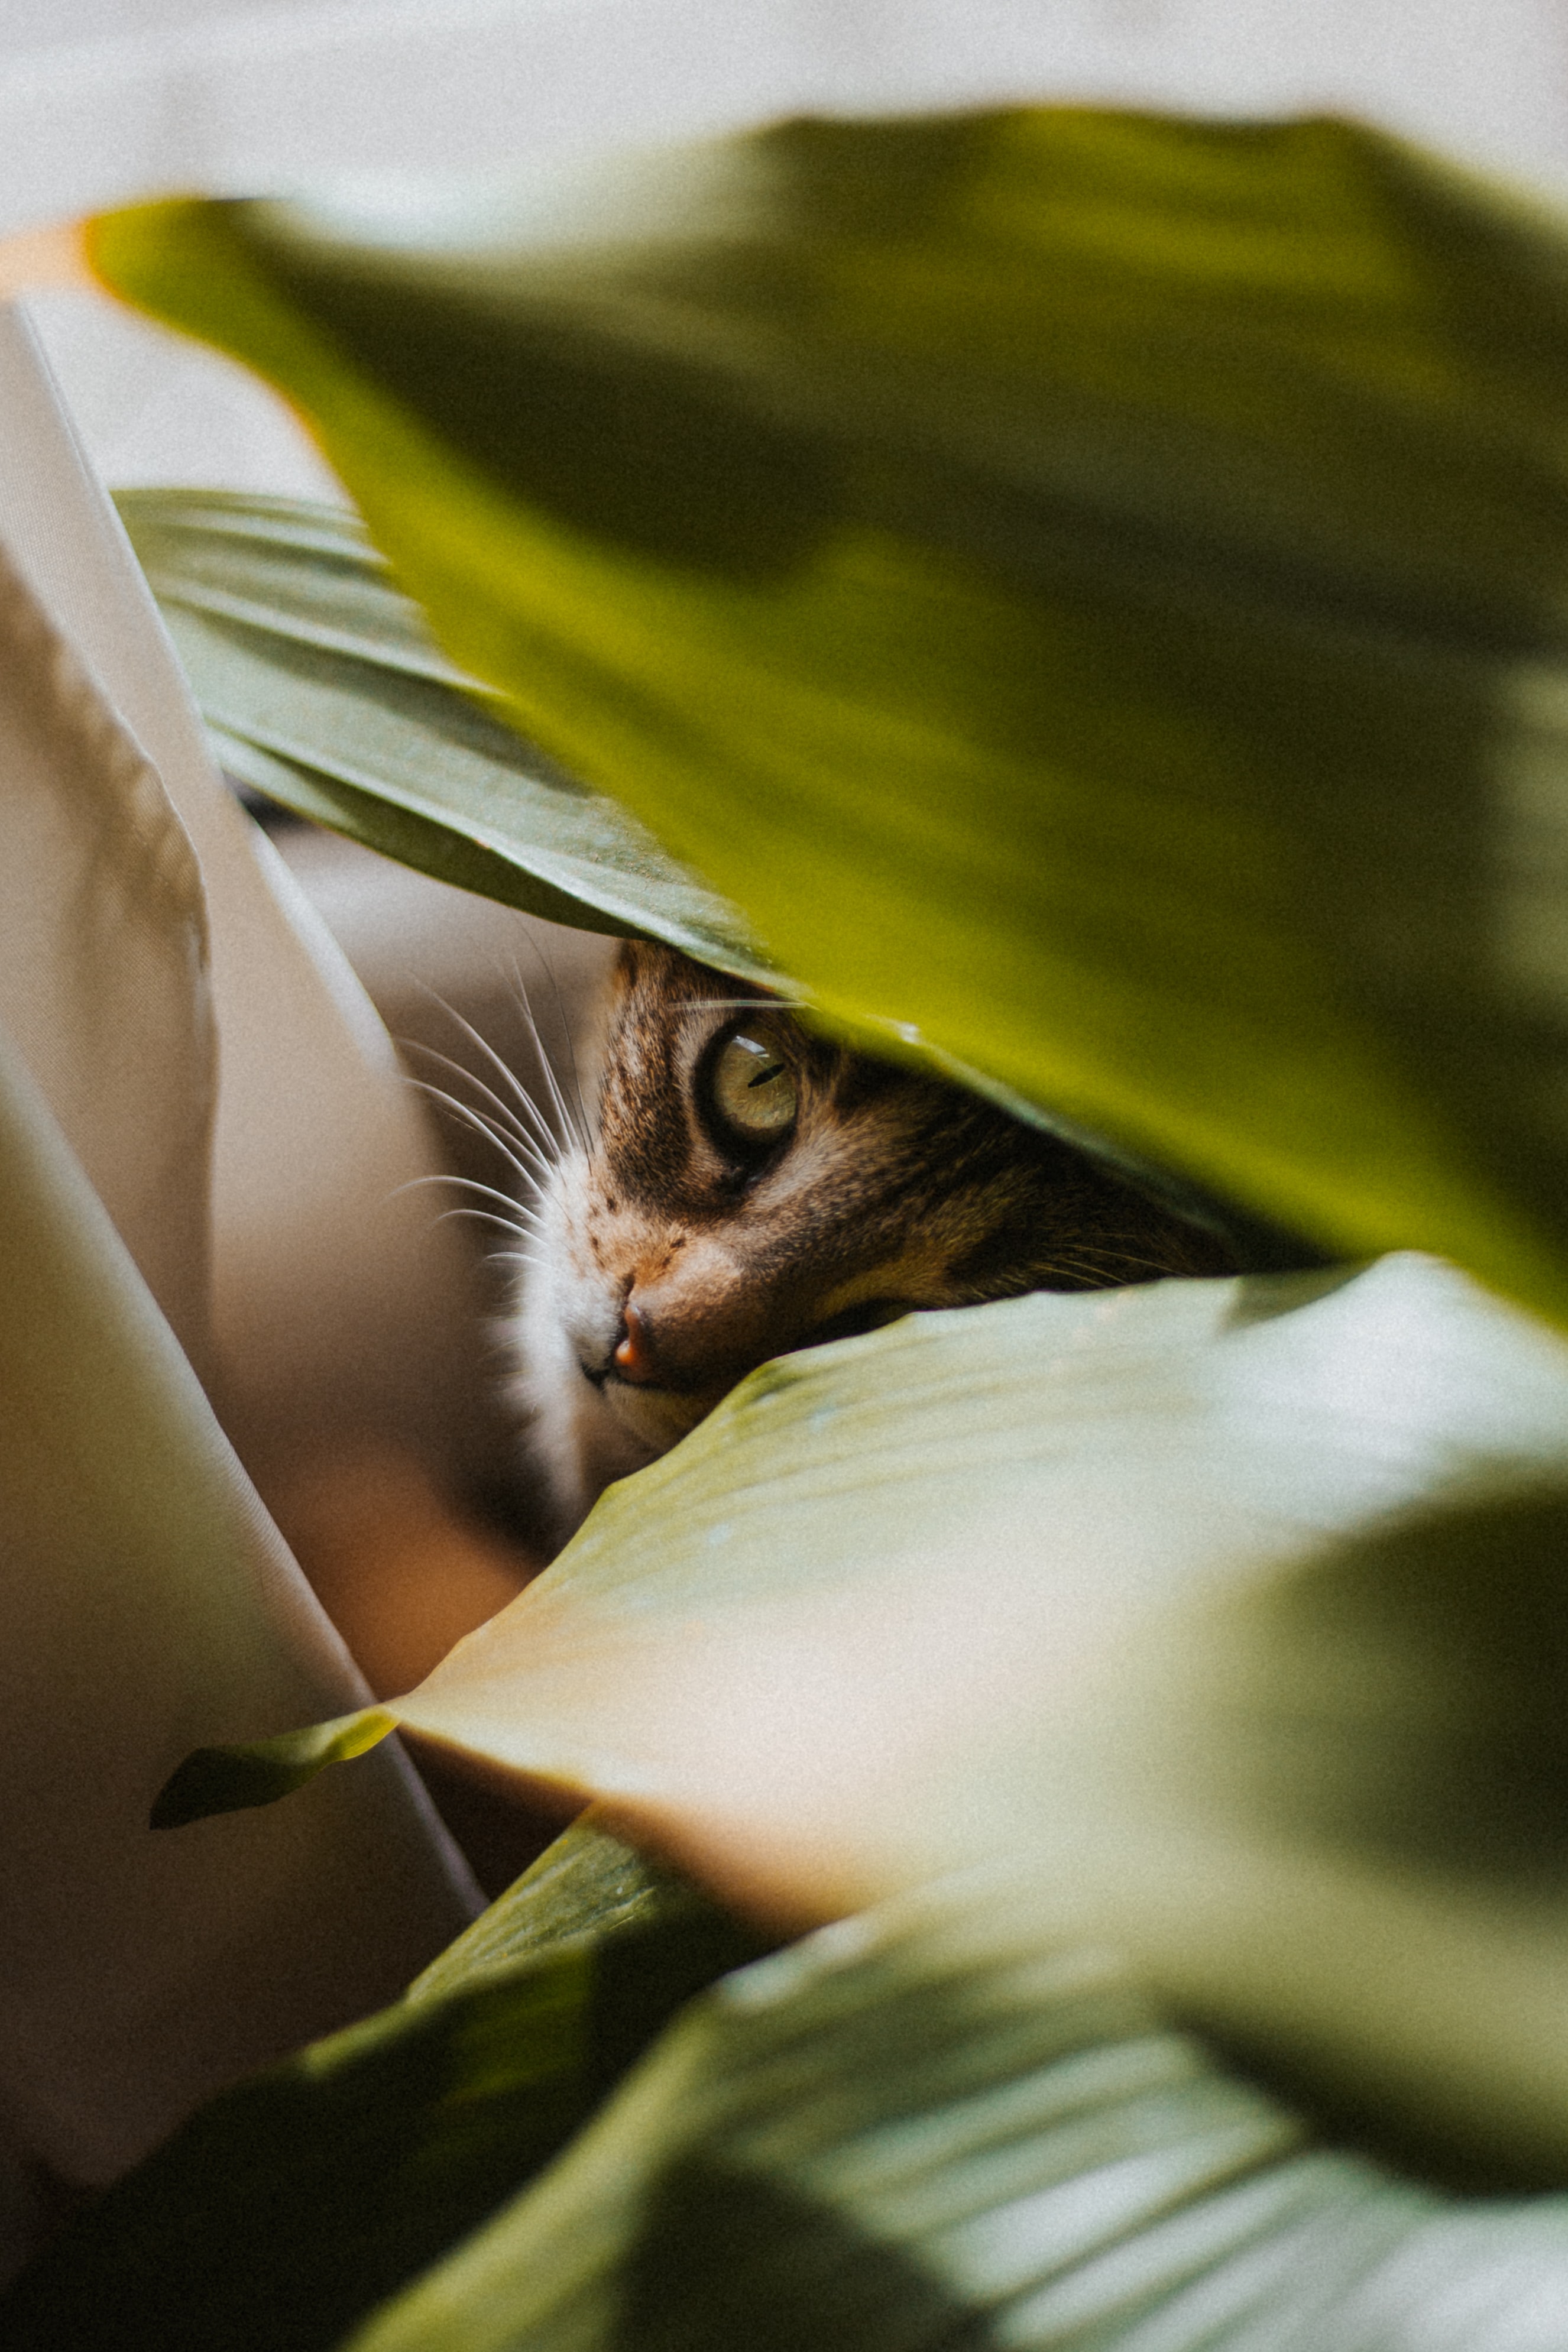 cat, animals, leaves, plant, pet, sight, opinion Image for desktop